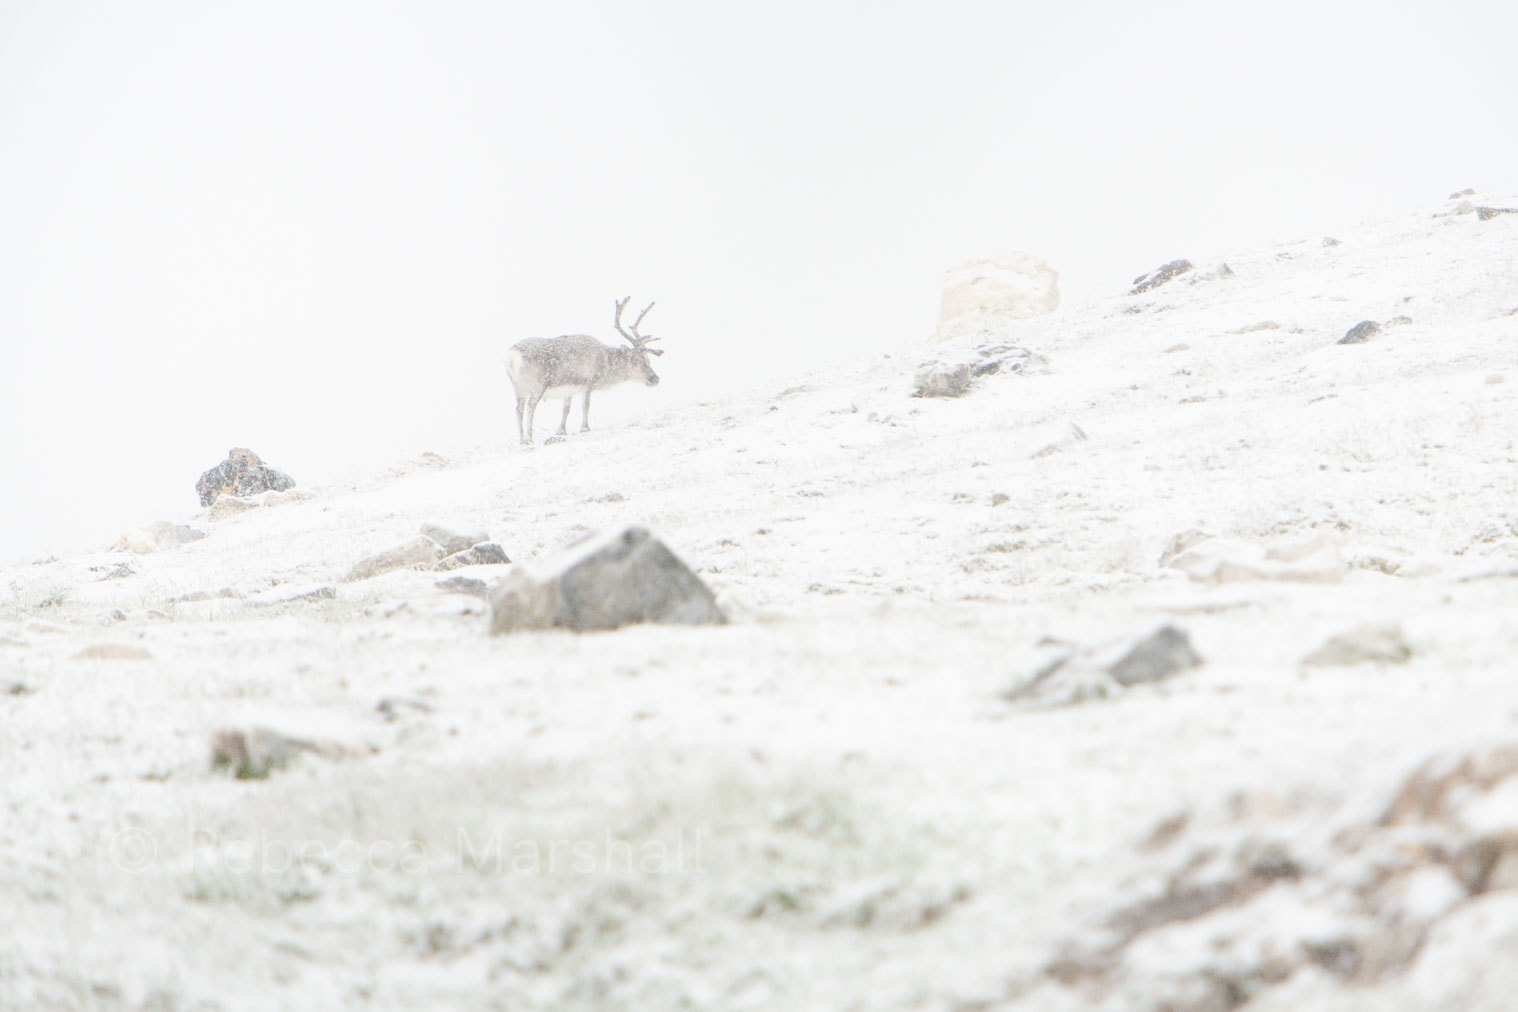 Photograph of a reindeer in a snowy landscape